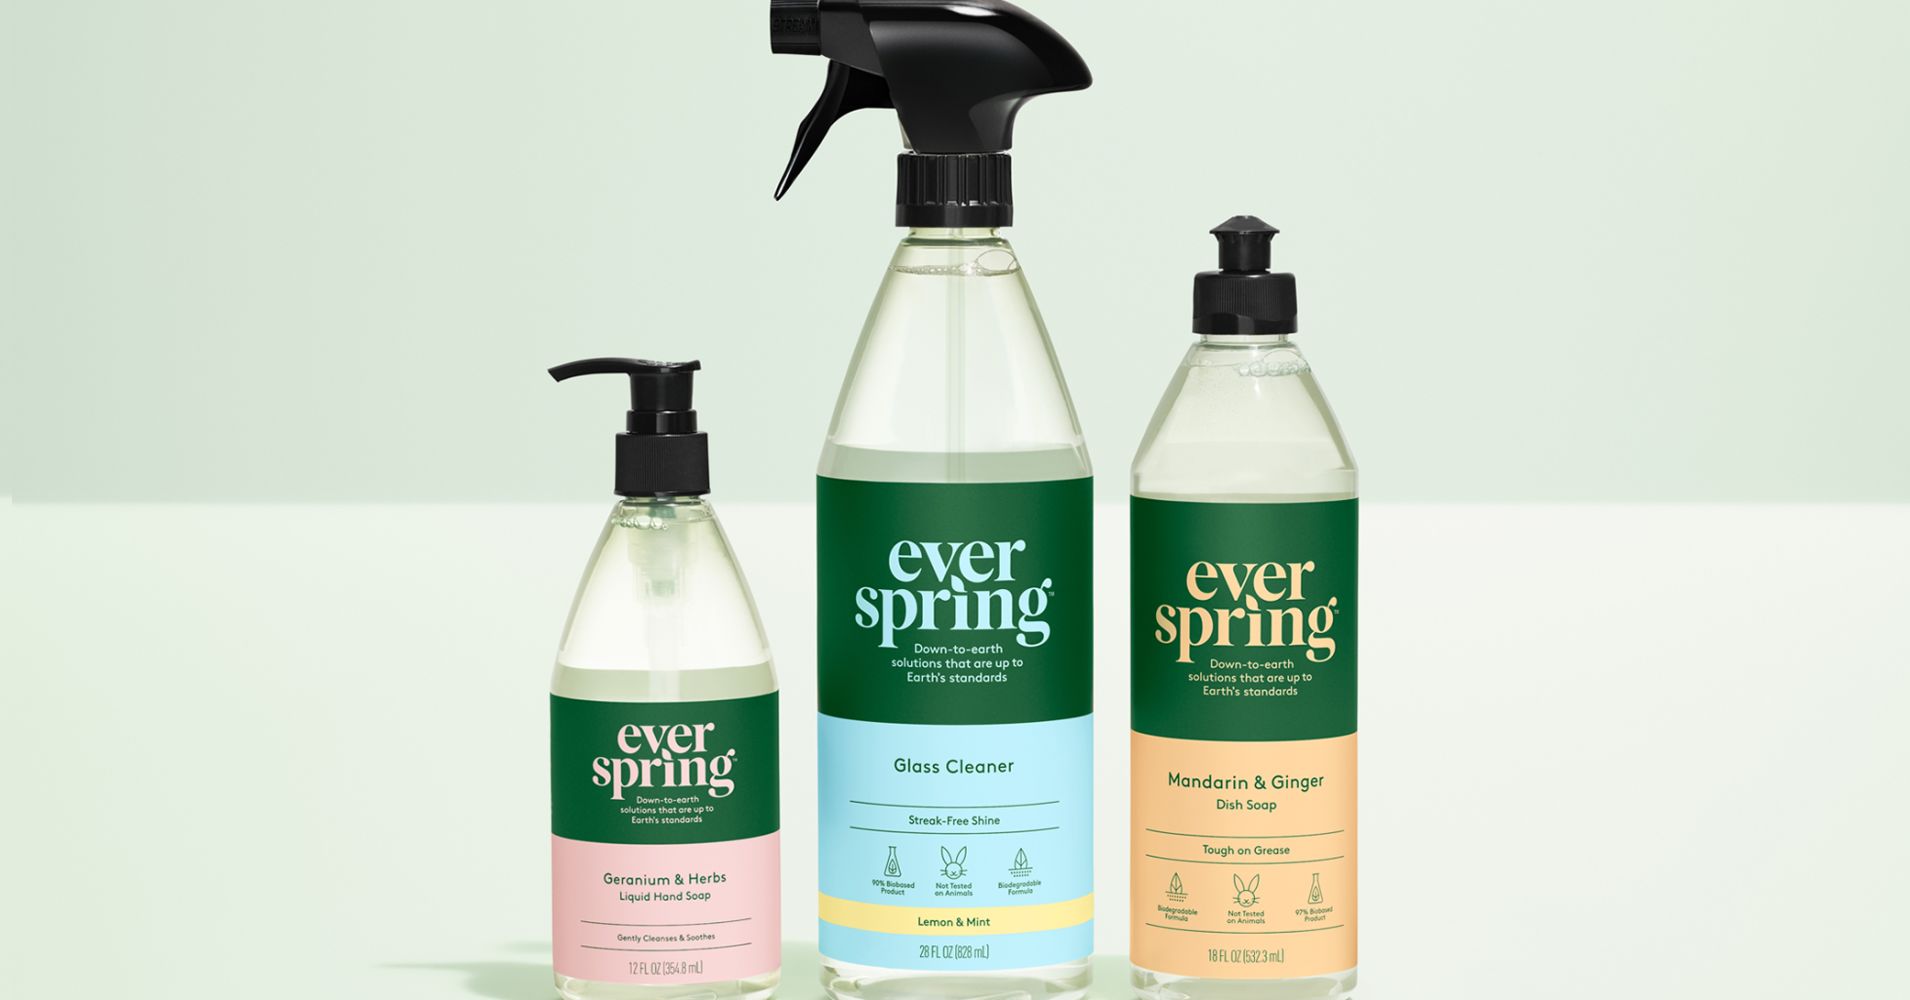 Target launches a new household essentials brand, for items like hand soap and laundry detergent, called Everspring.